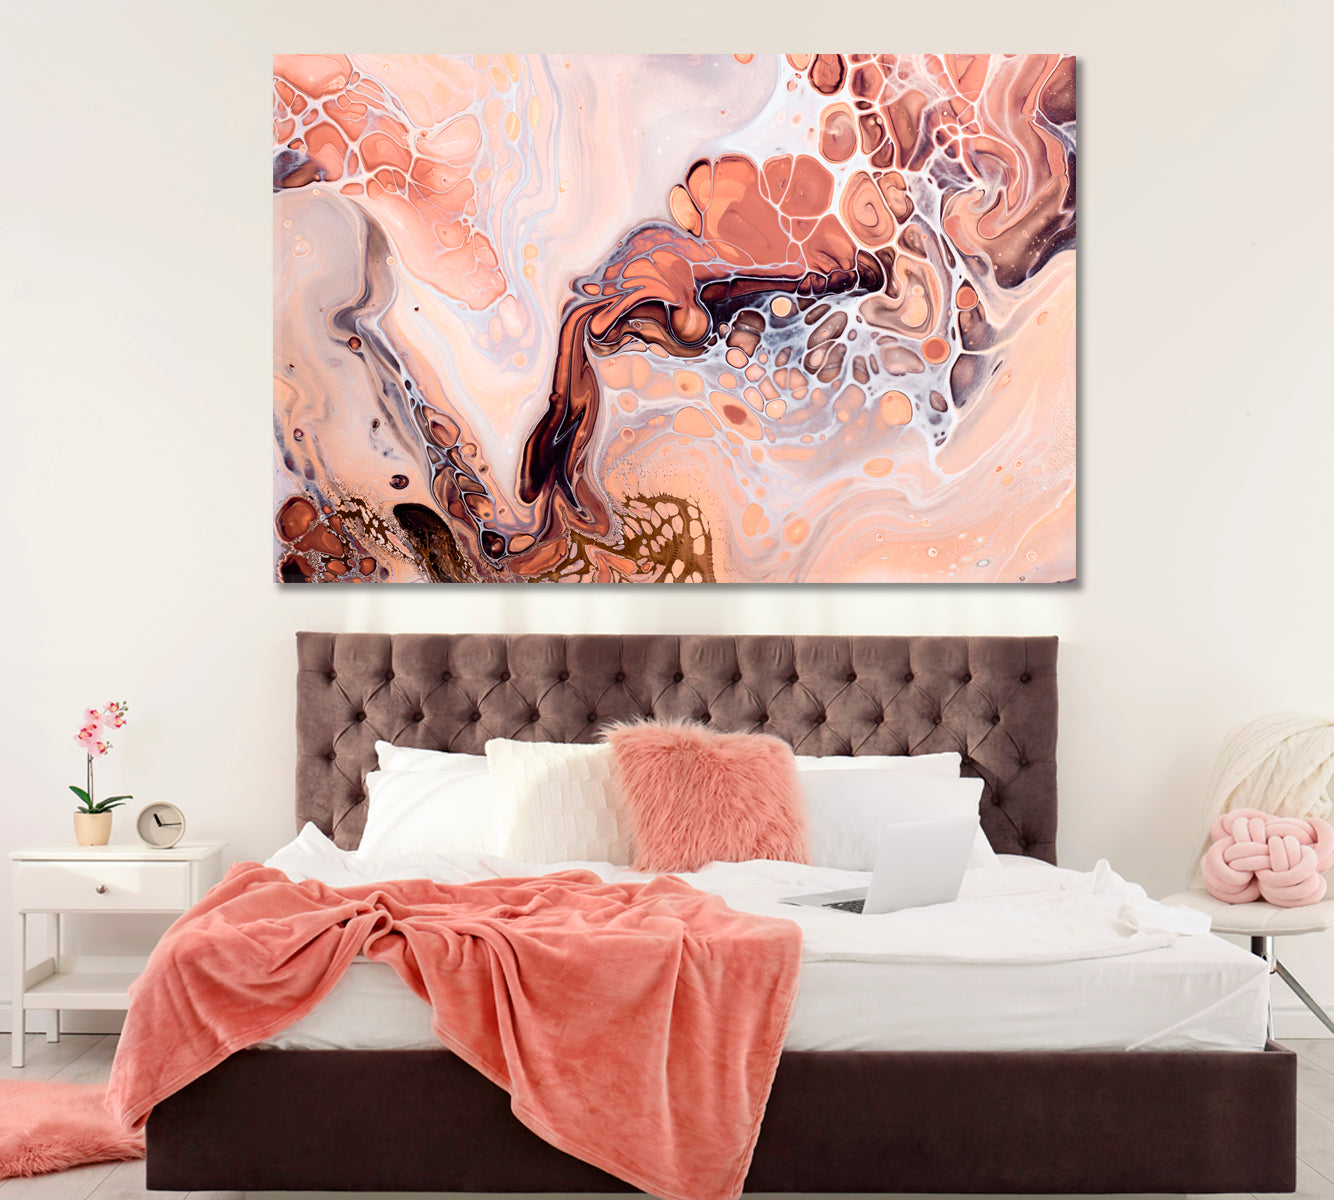 Pastel Colors Acrylic Bubbles Abstract Design Canvas Print ArtLexy 1 Panel 24"x16" inches 